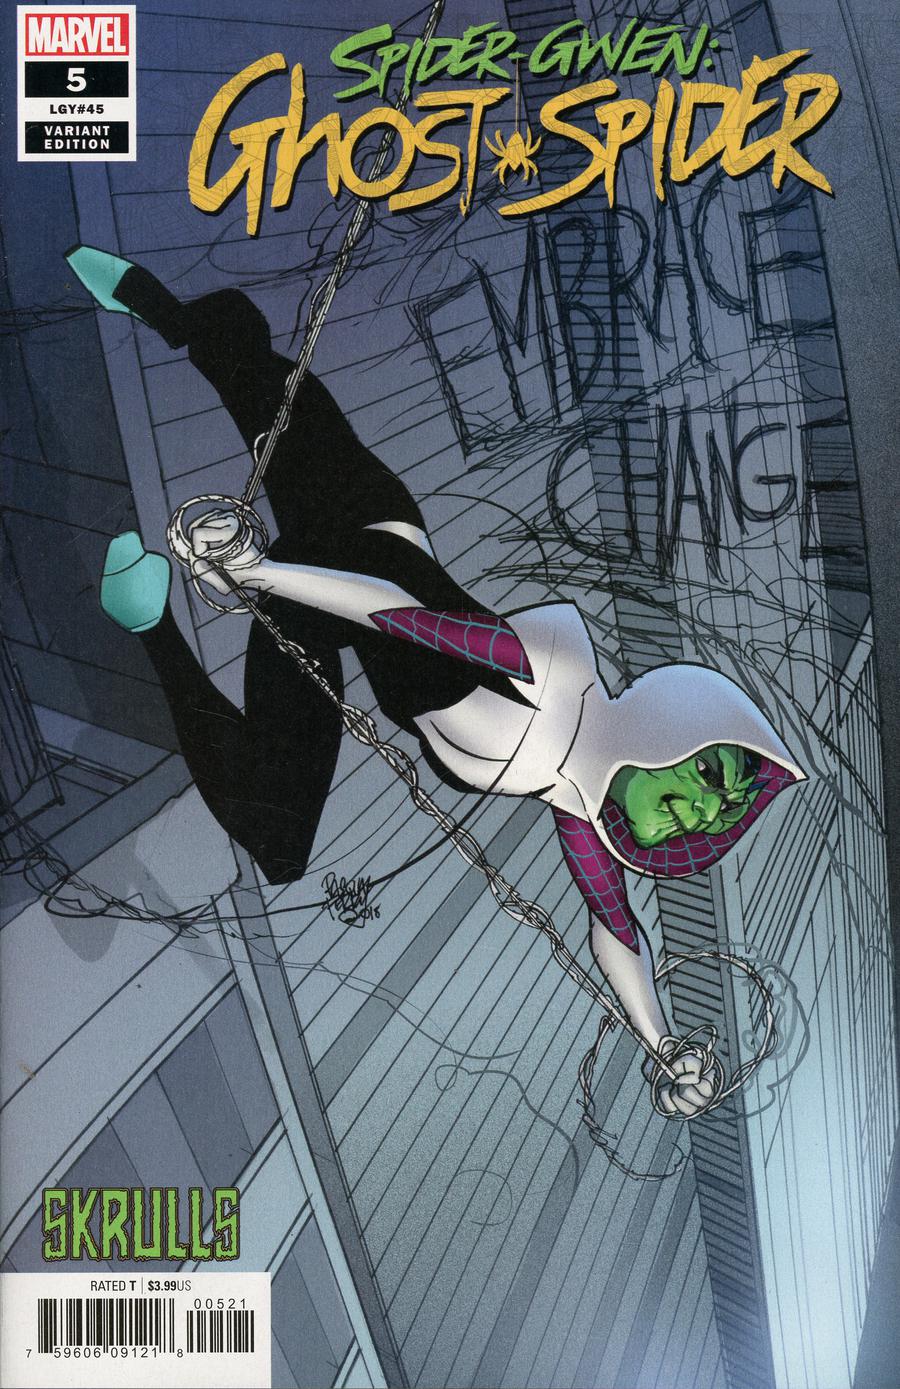 Spider-Gwen Ghost-Spider #5 Cover B Variant Pasqual Ferry Skrulls Cover